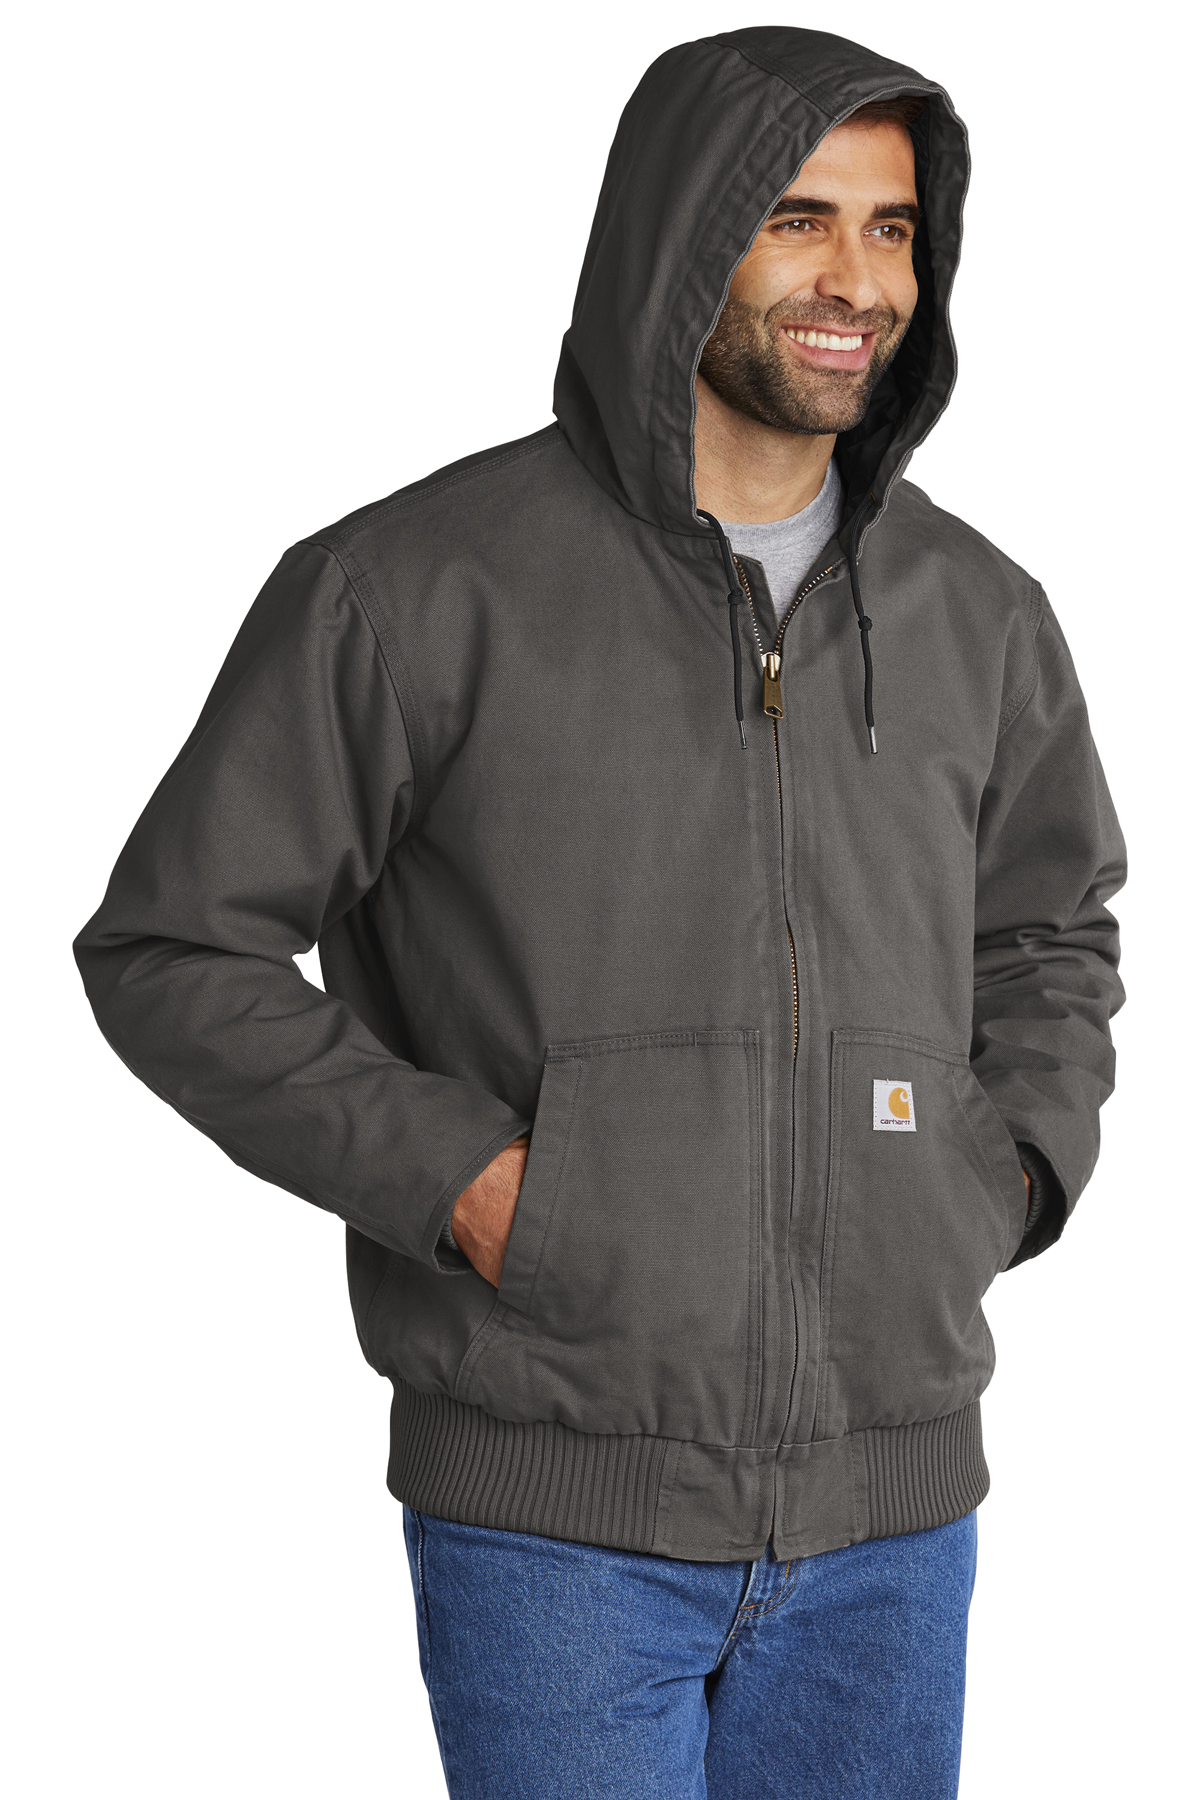 Carhartt Washed Duck Active Jac | Product | SanMar